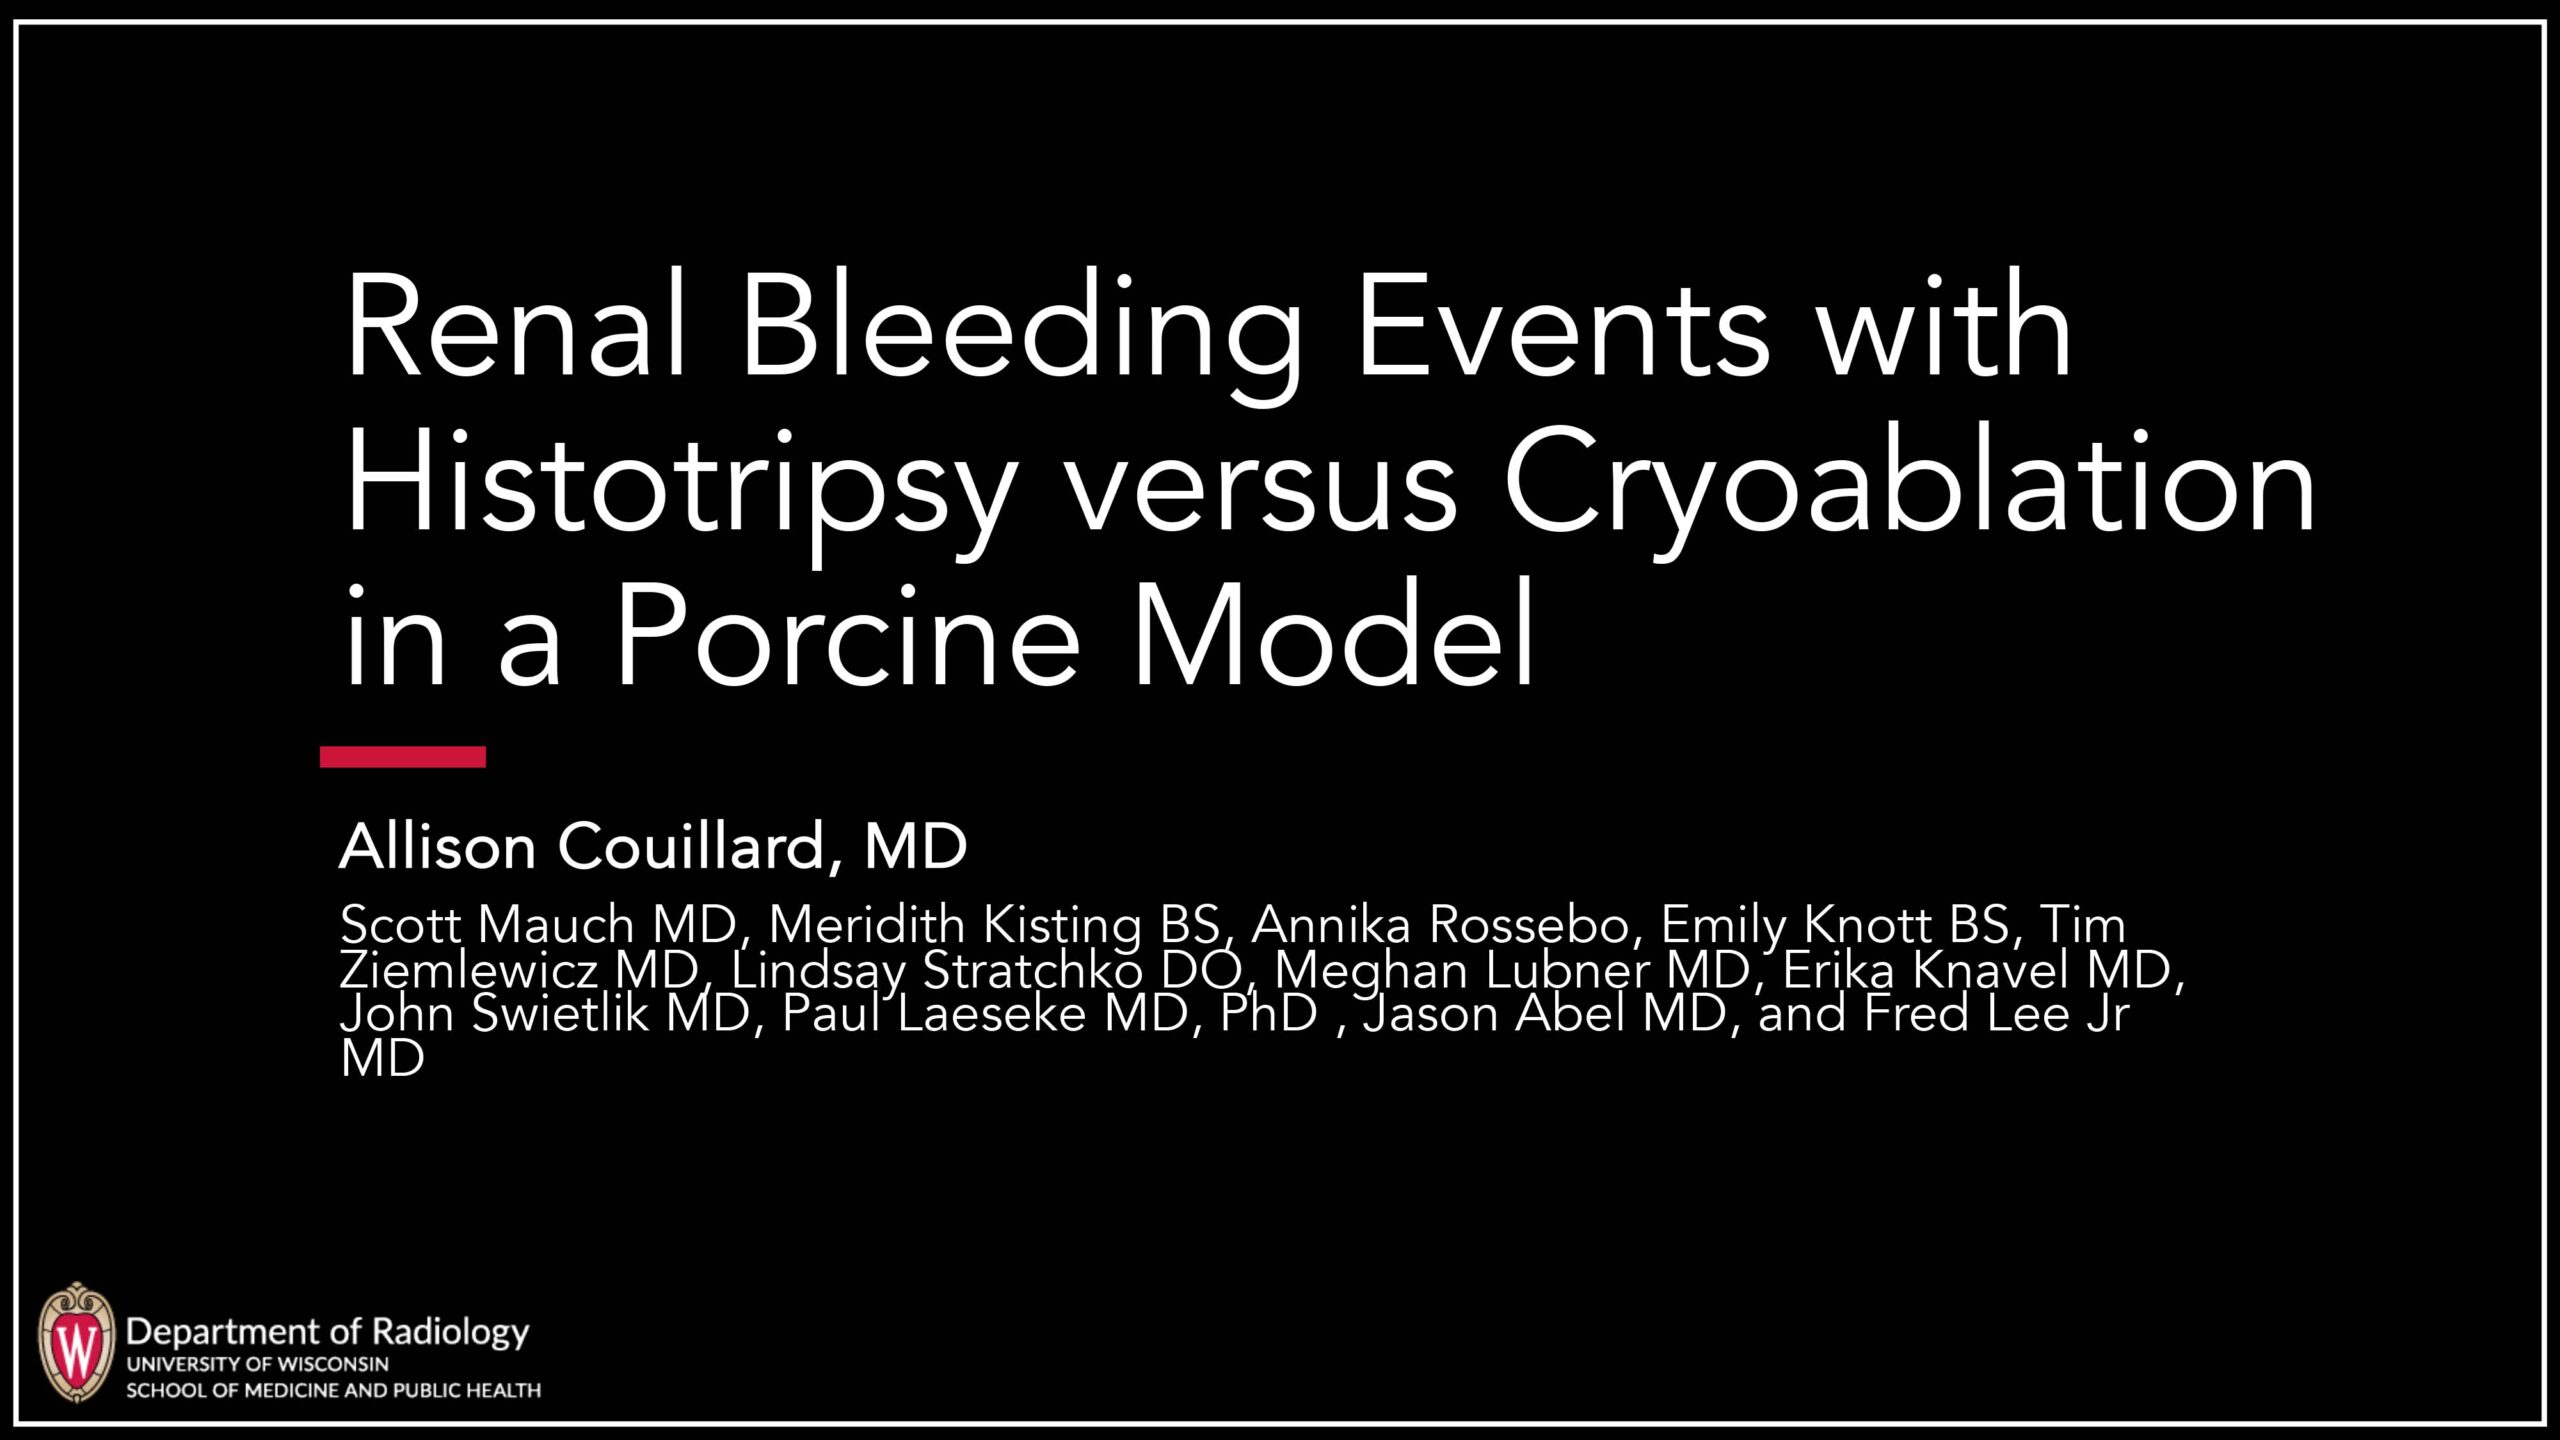 Renal Bleeding Events with Histotripsy vs. Cryoablation in a Porcine Survival Model